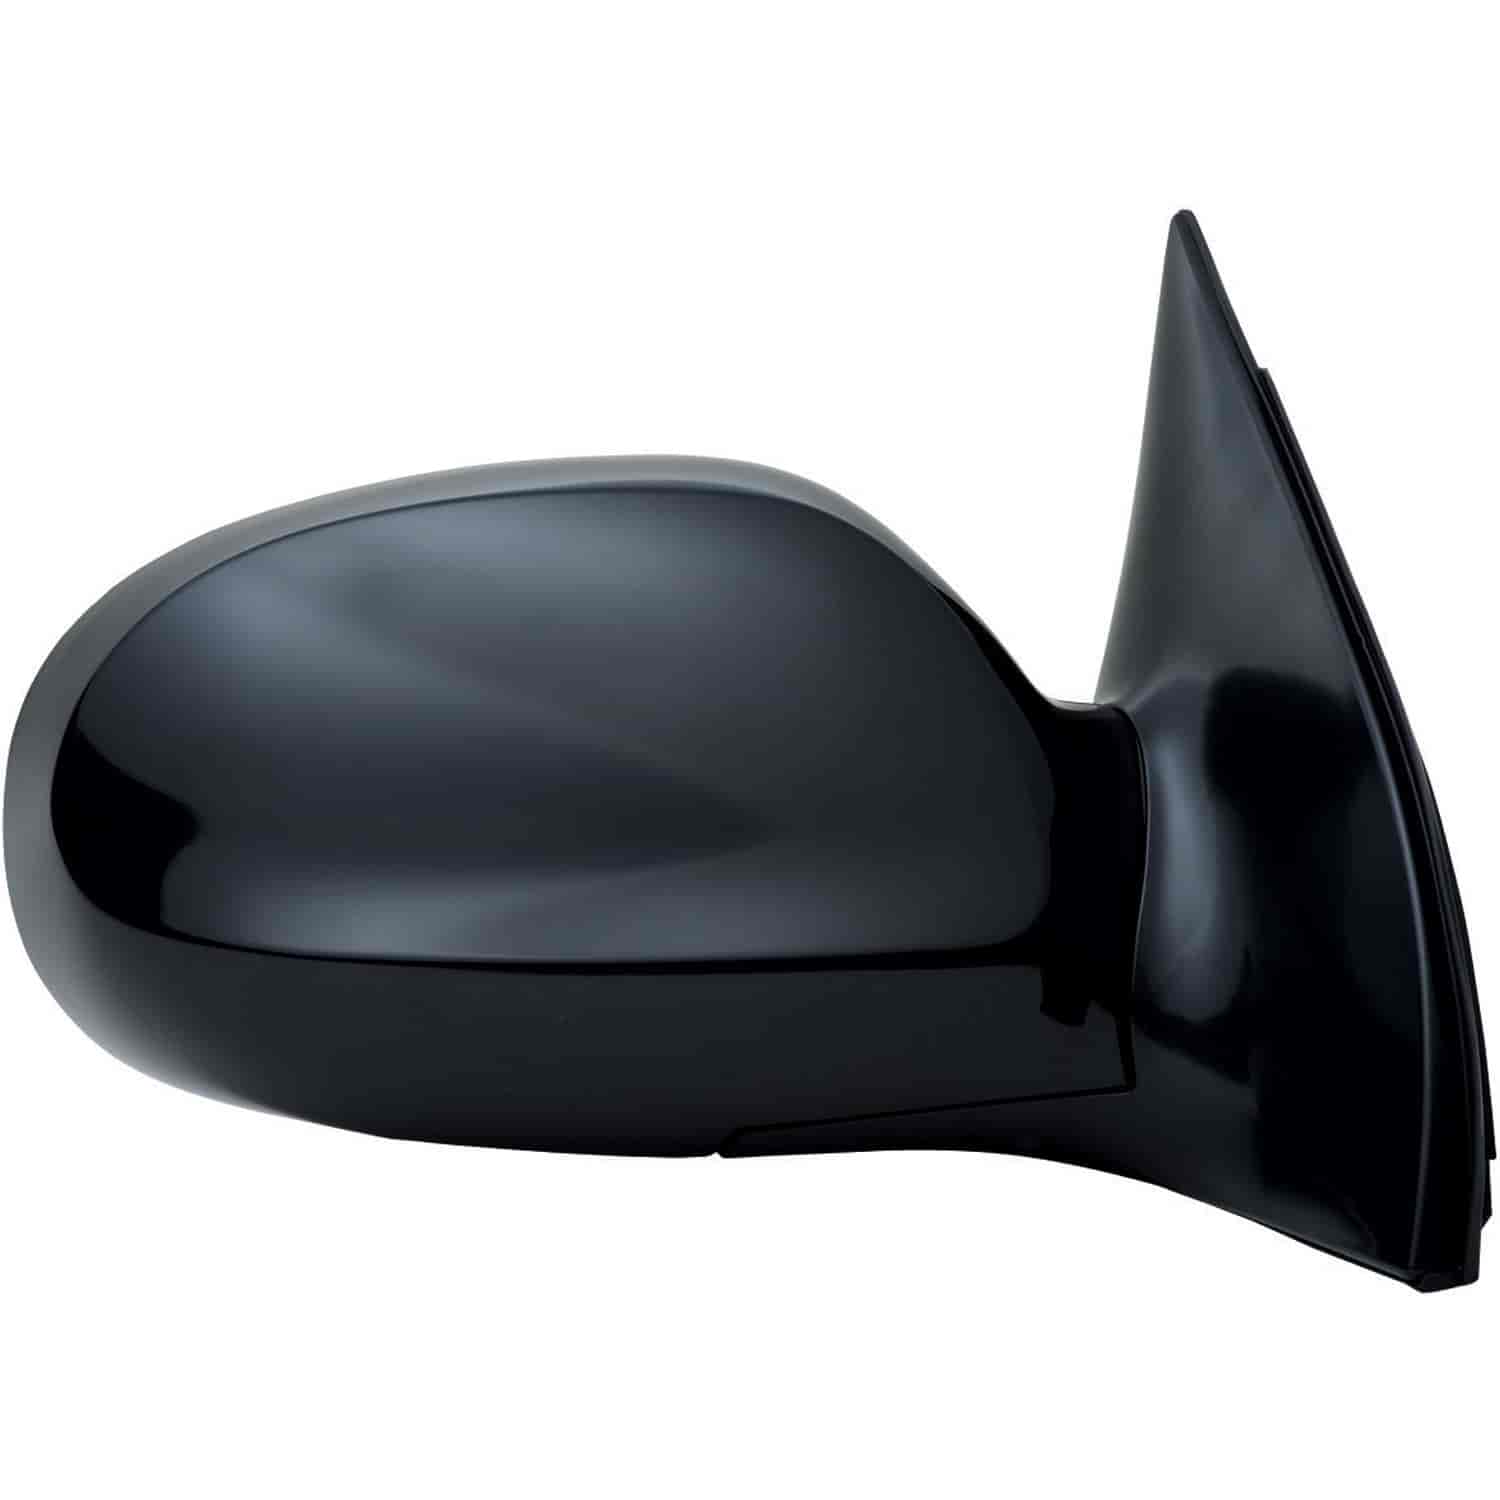 OEM Style Replacement mirror for 02-05 Kia Sedona EX model passenger side mirror tested to fit and f